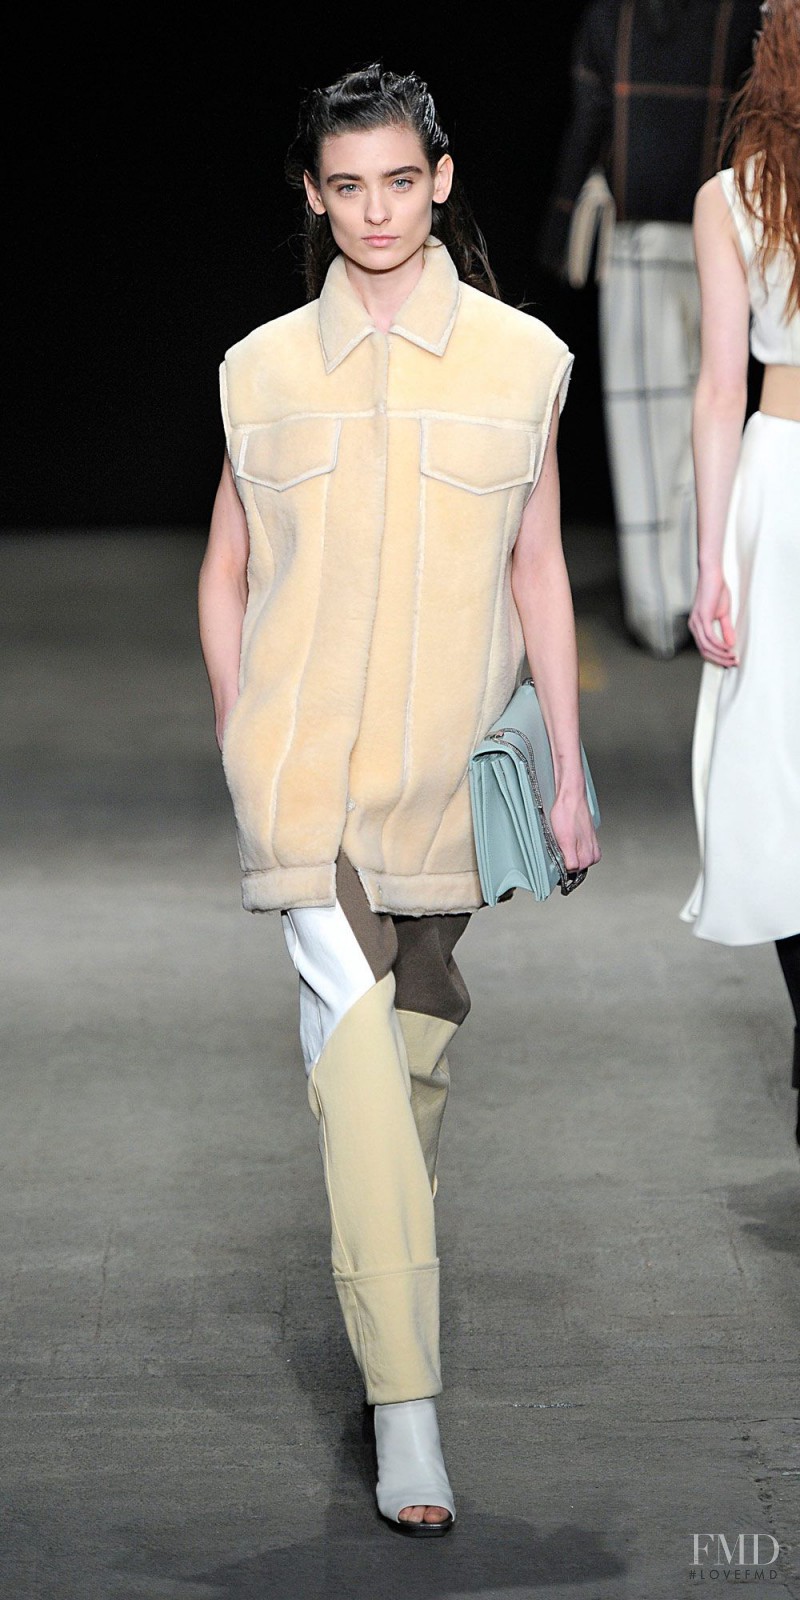 Carolina Thaler featured in  the 3.1 Phillip Lim fashion show for Autumn/Winter 2014